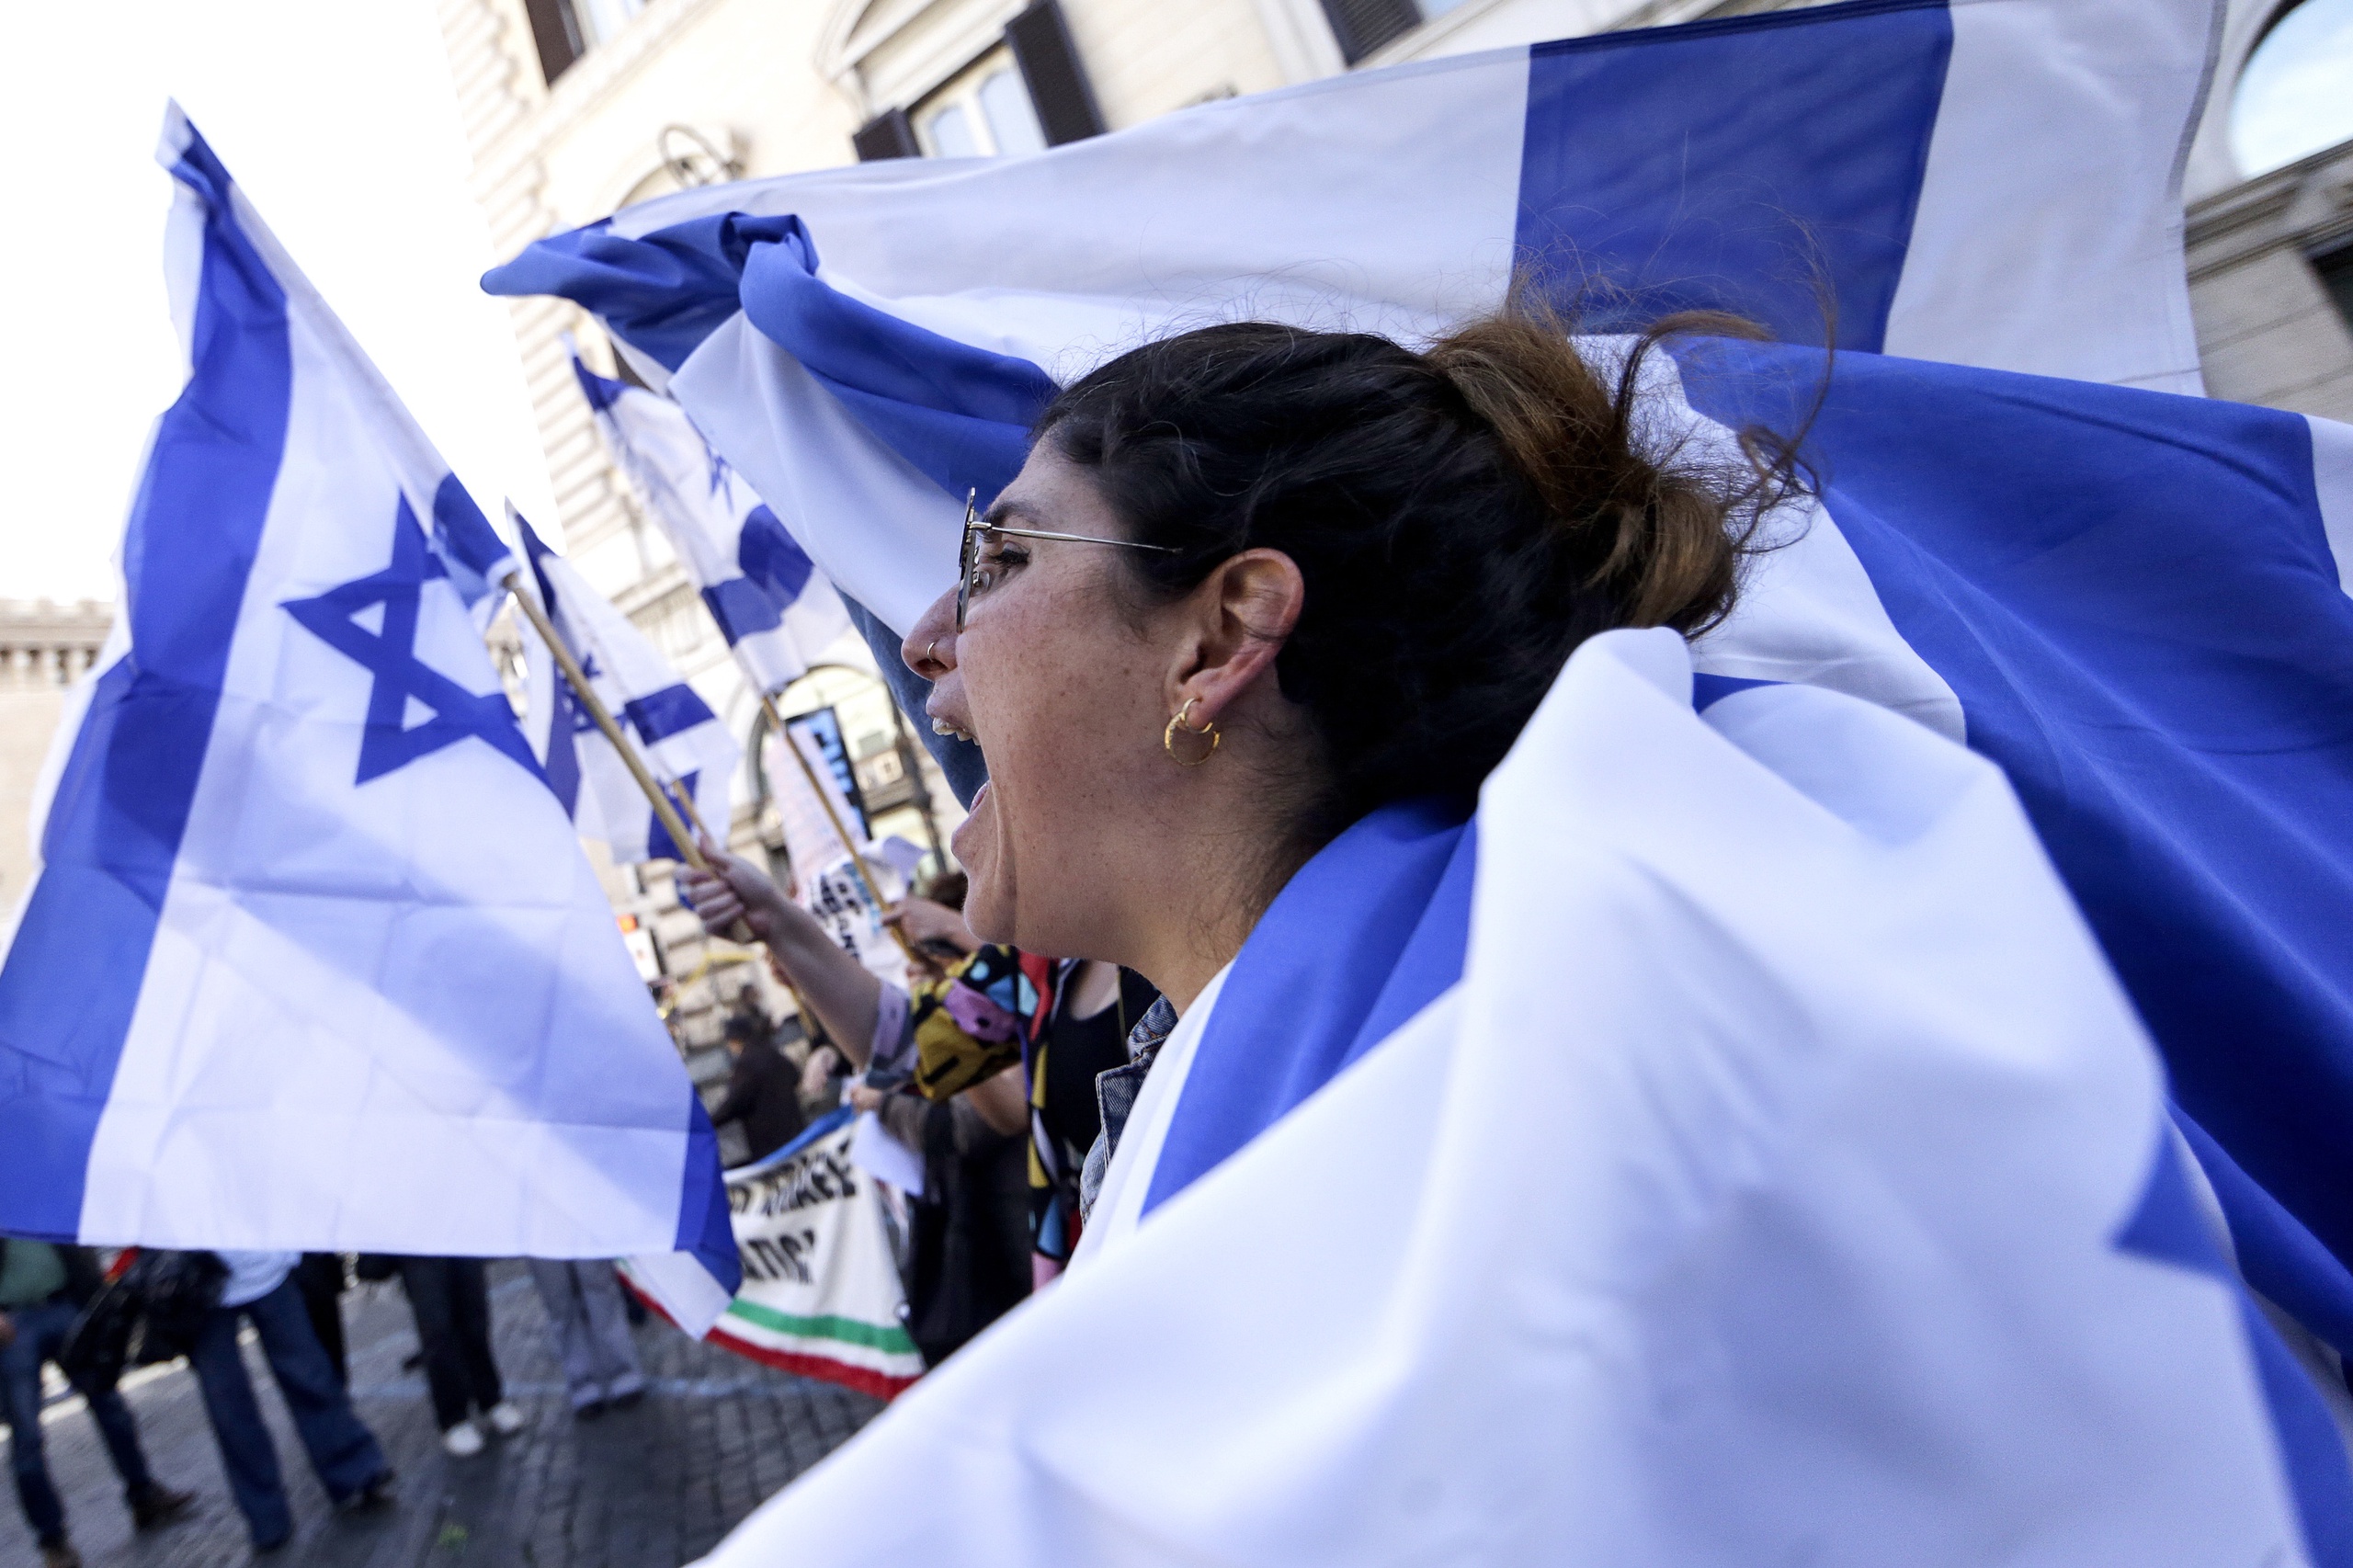 Protests in Israel continue.  According to Israeli President Yitzhak Herzog, the country even risks disintegrating.